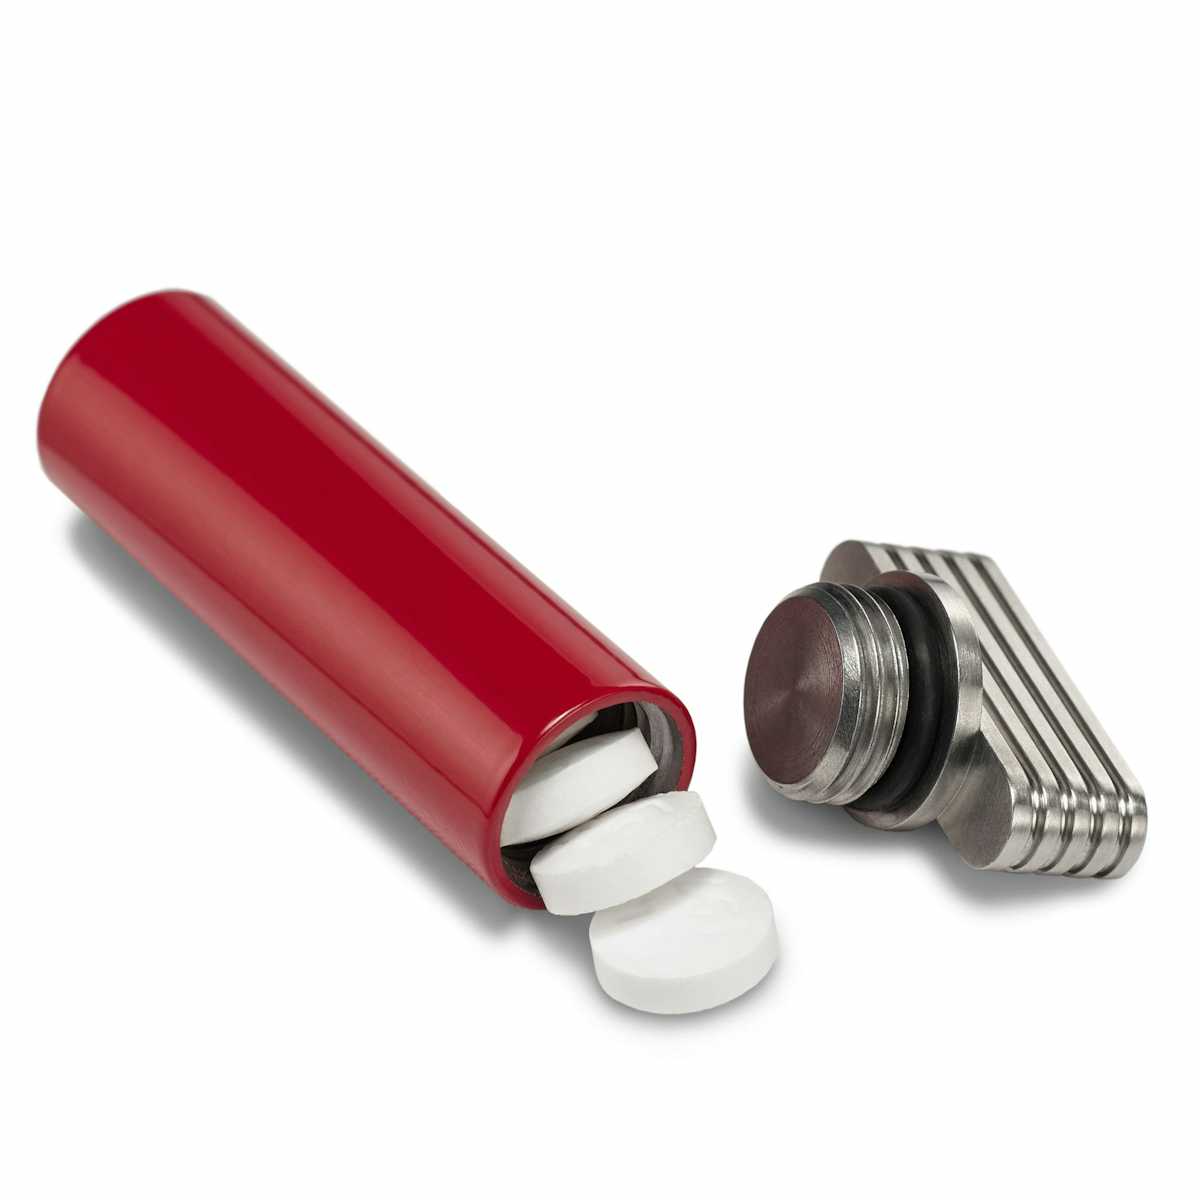 Red and Stainless Steel Keychain Pill Holder - Designer Nitro Necklace - Cielo Pill Holders